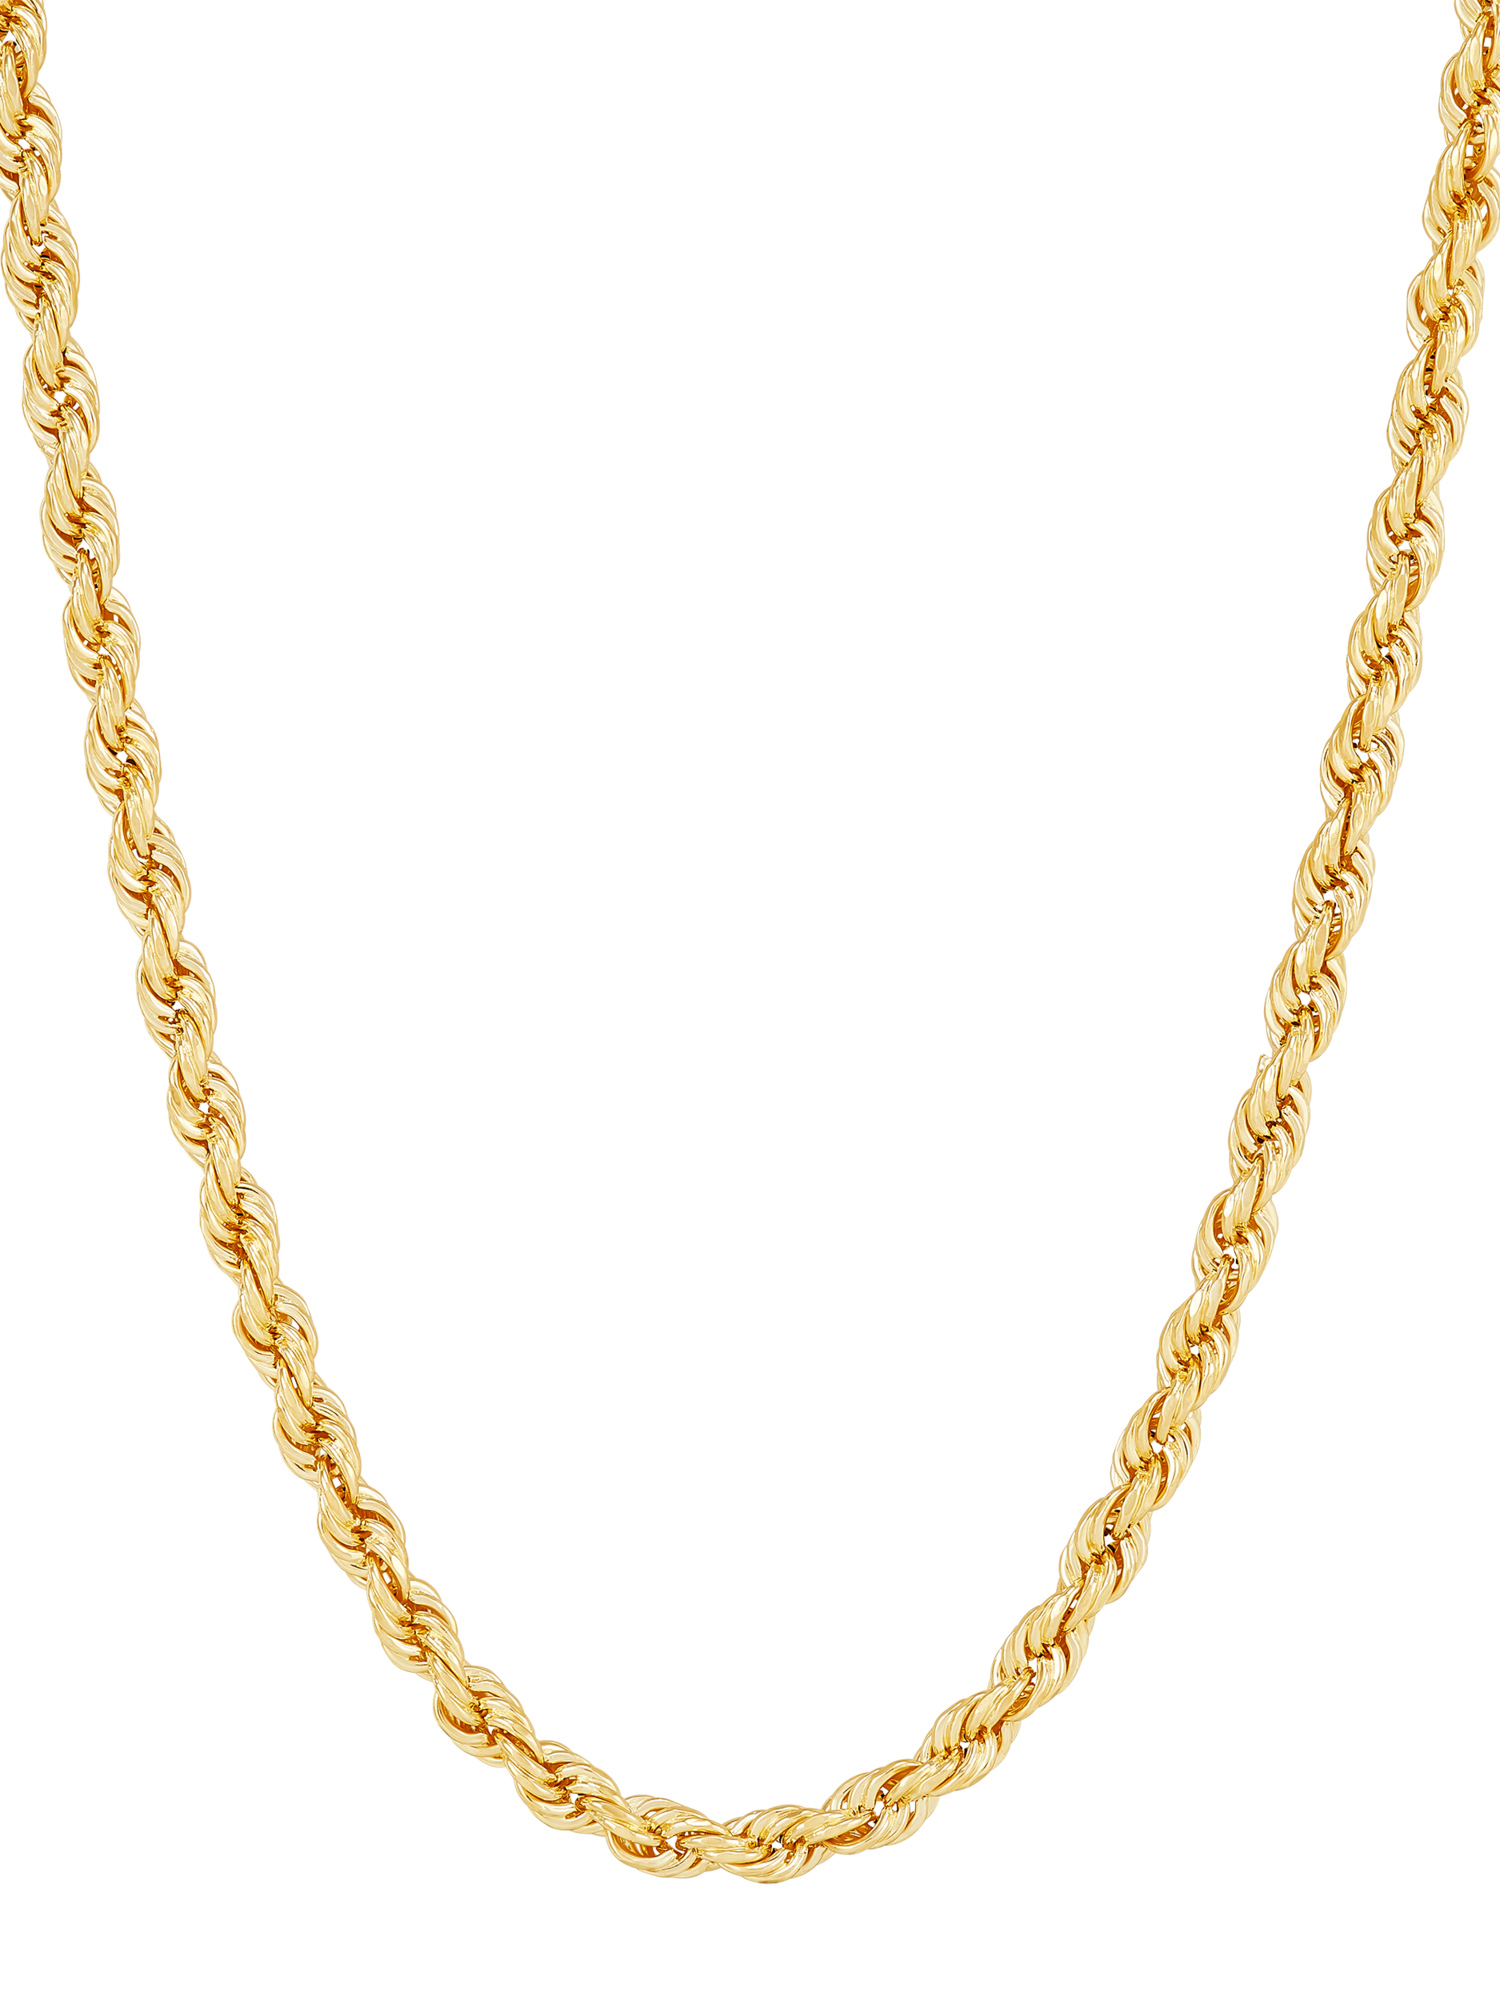 Brilliance Fine Jewelry 10K Yellow Gold 3.20MM - 3.40MM Hollow Rope  Necklace,20